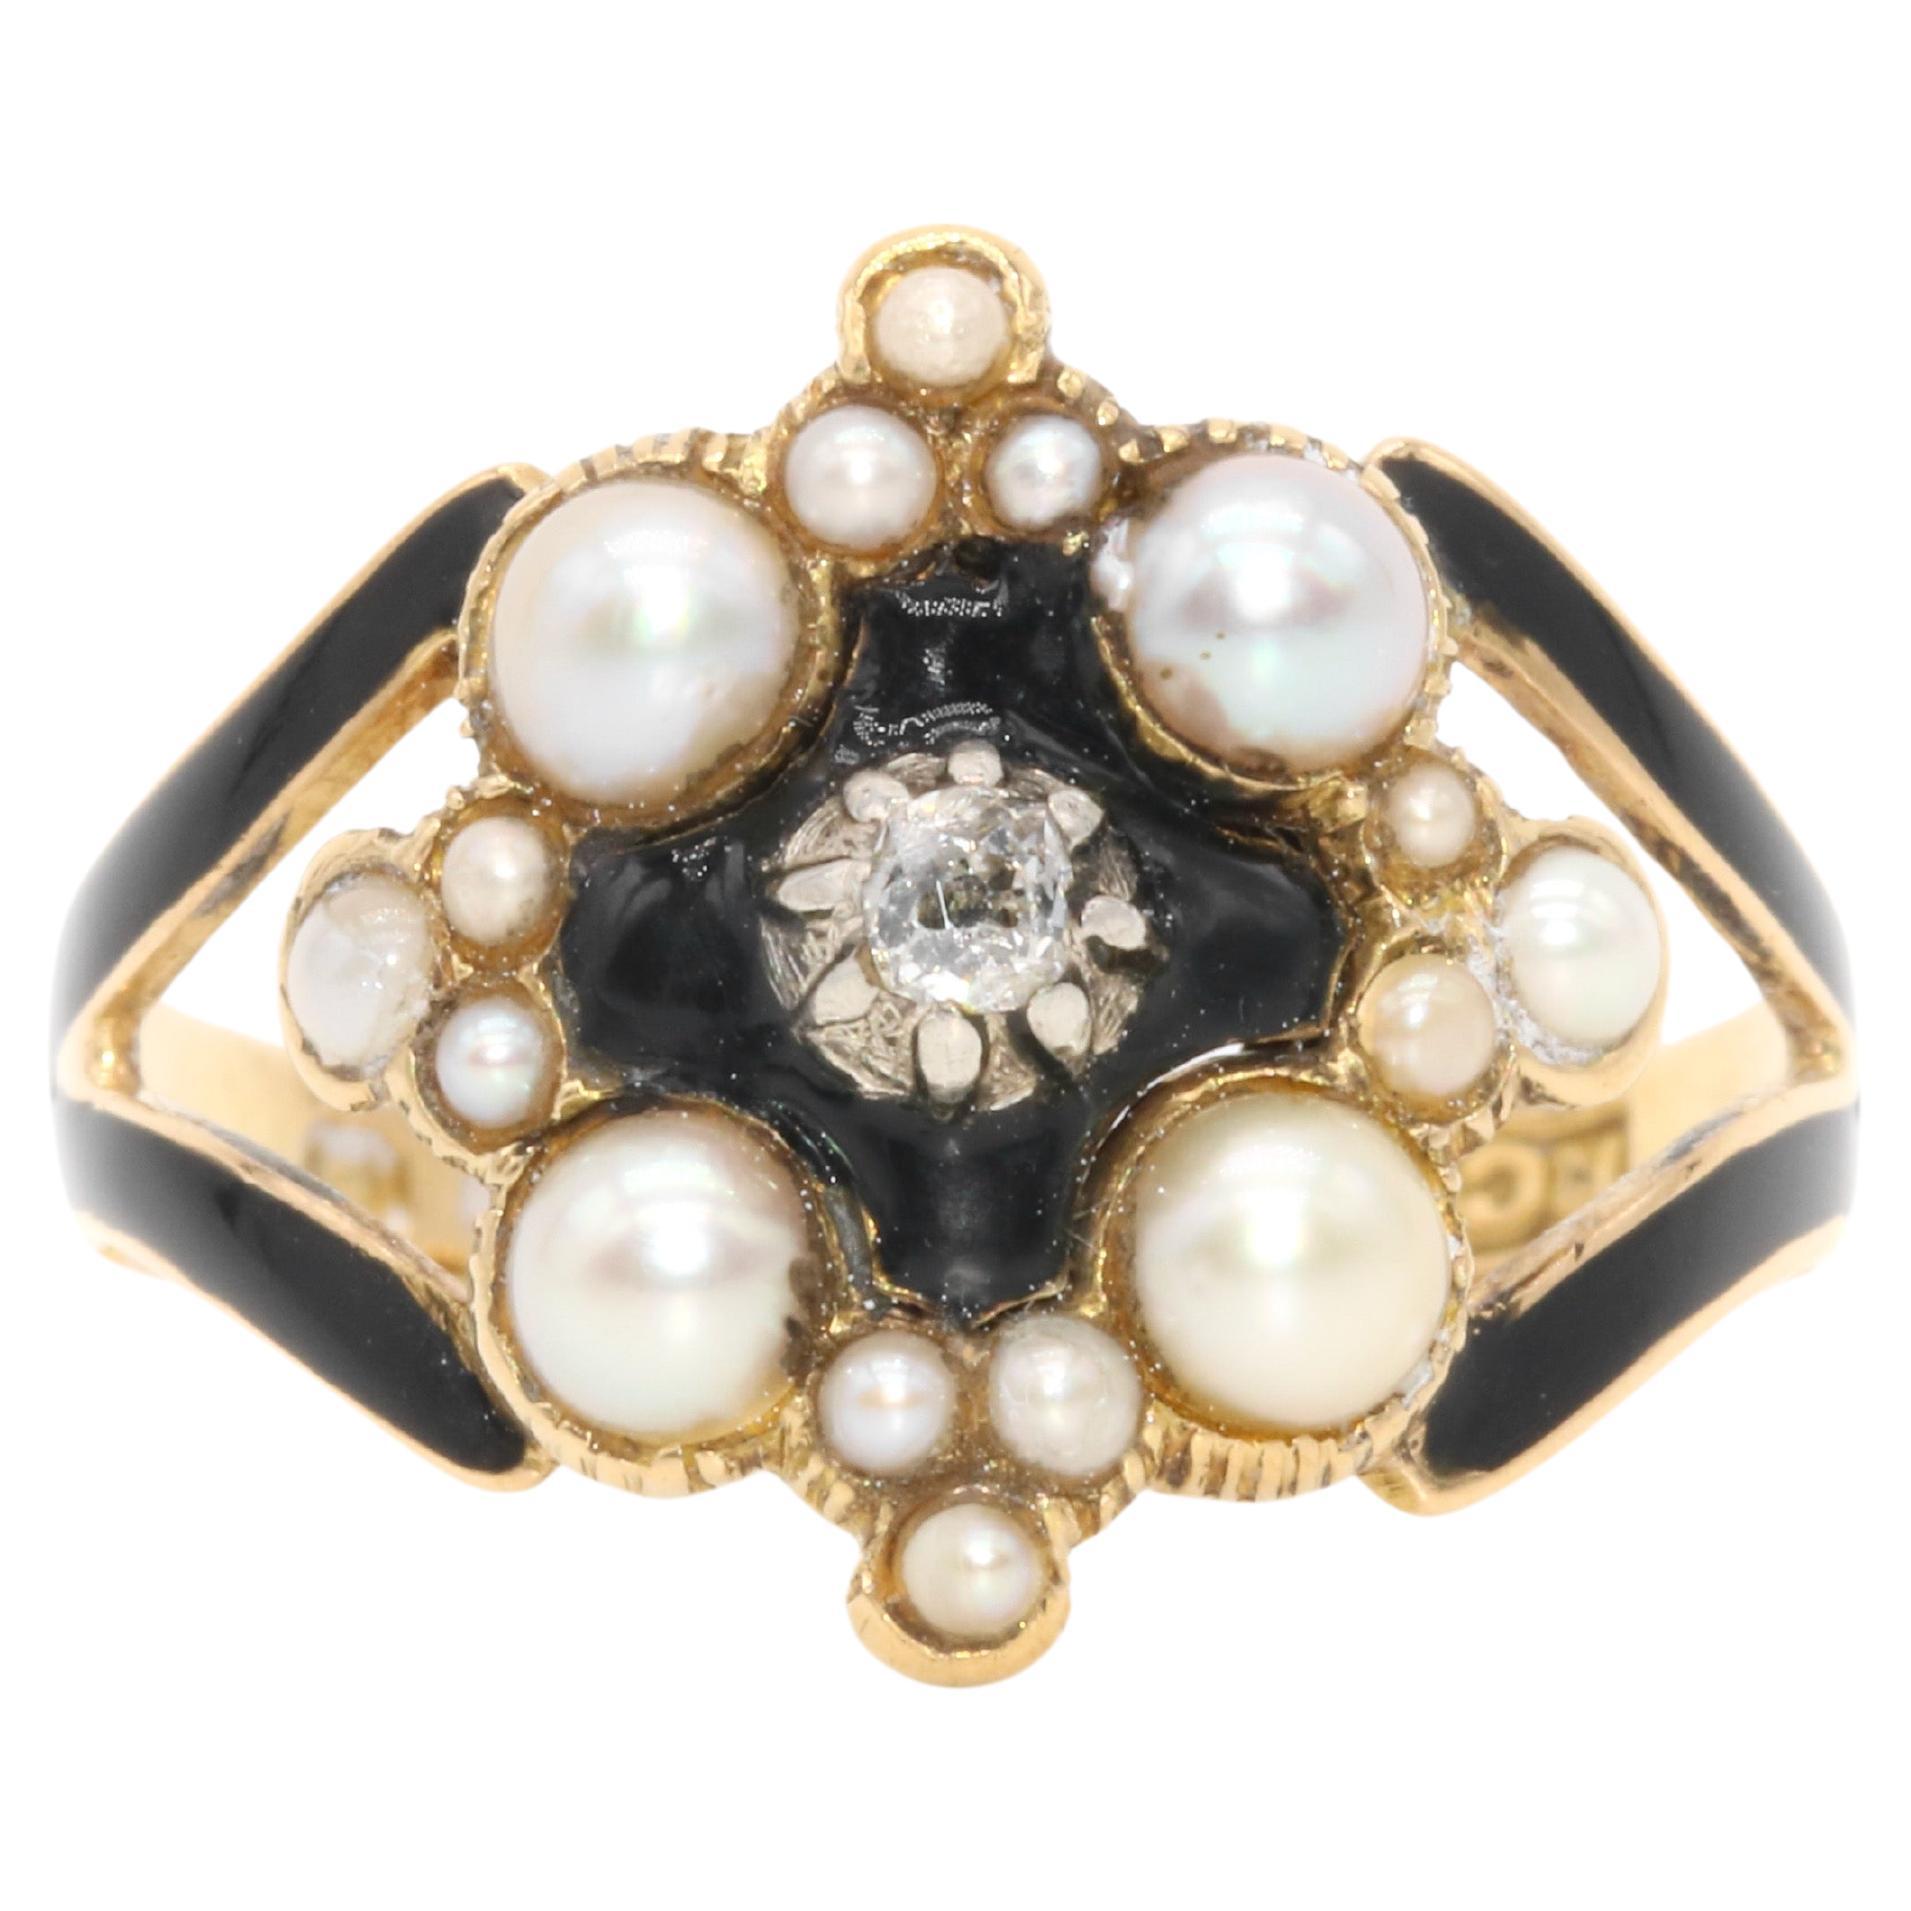 Antique Victorian 1840s 18K Gold Diamond, Pearl and Black Enamel Mourning Ring